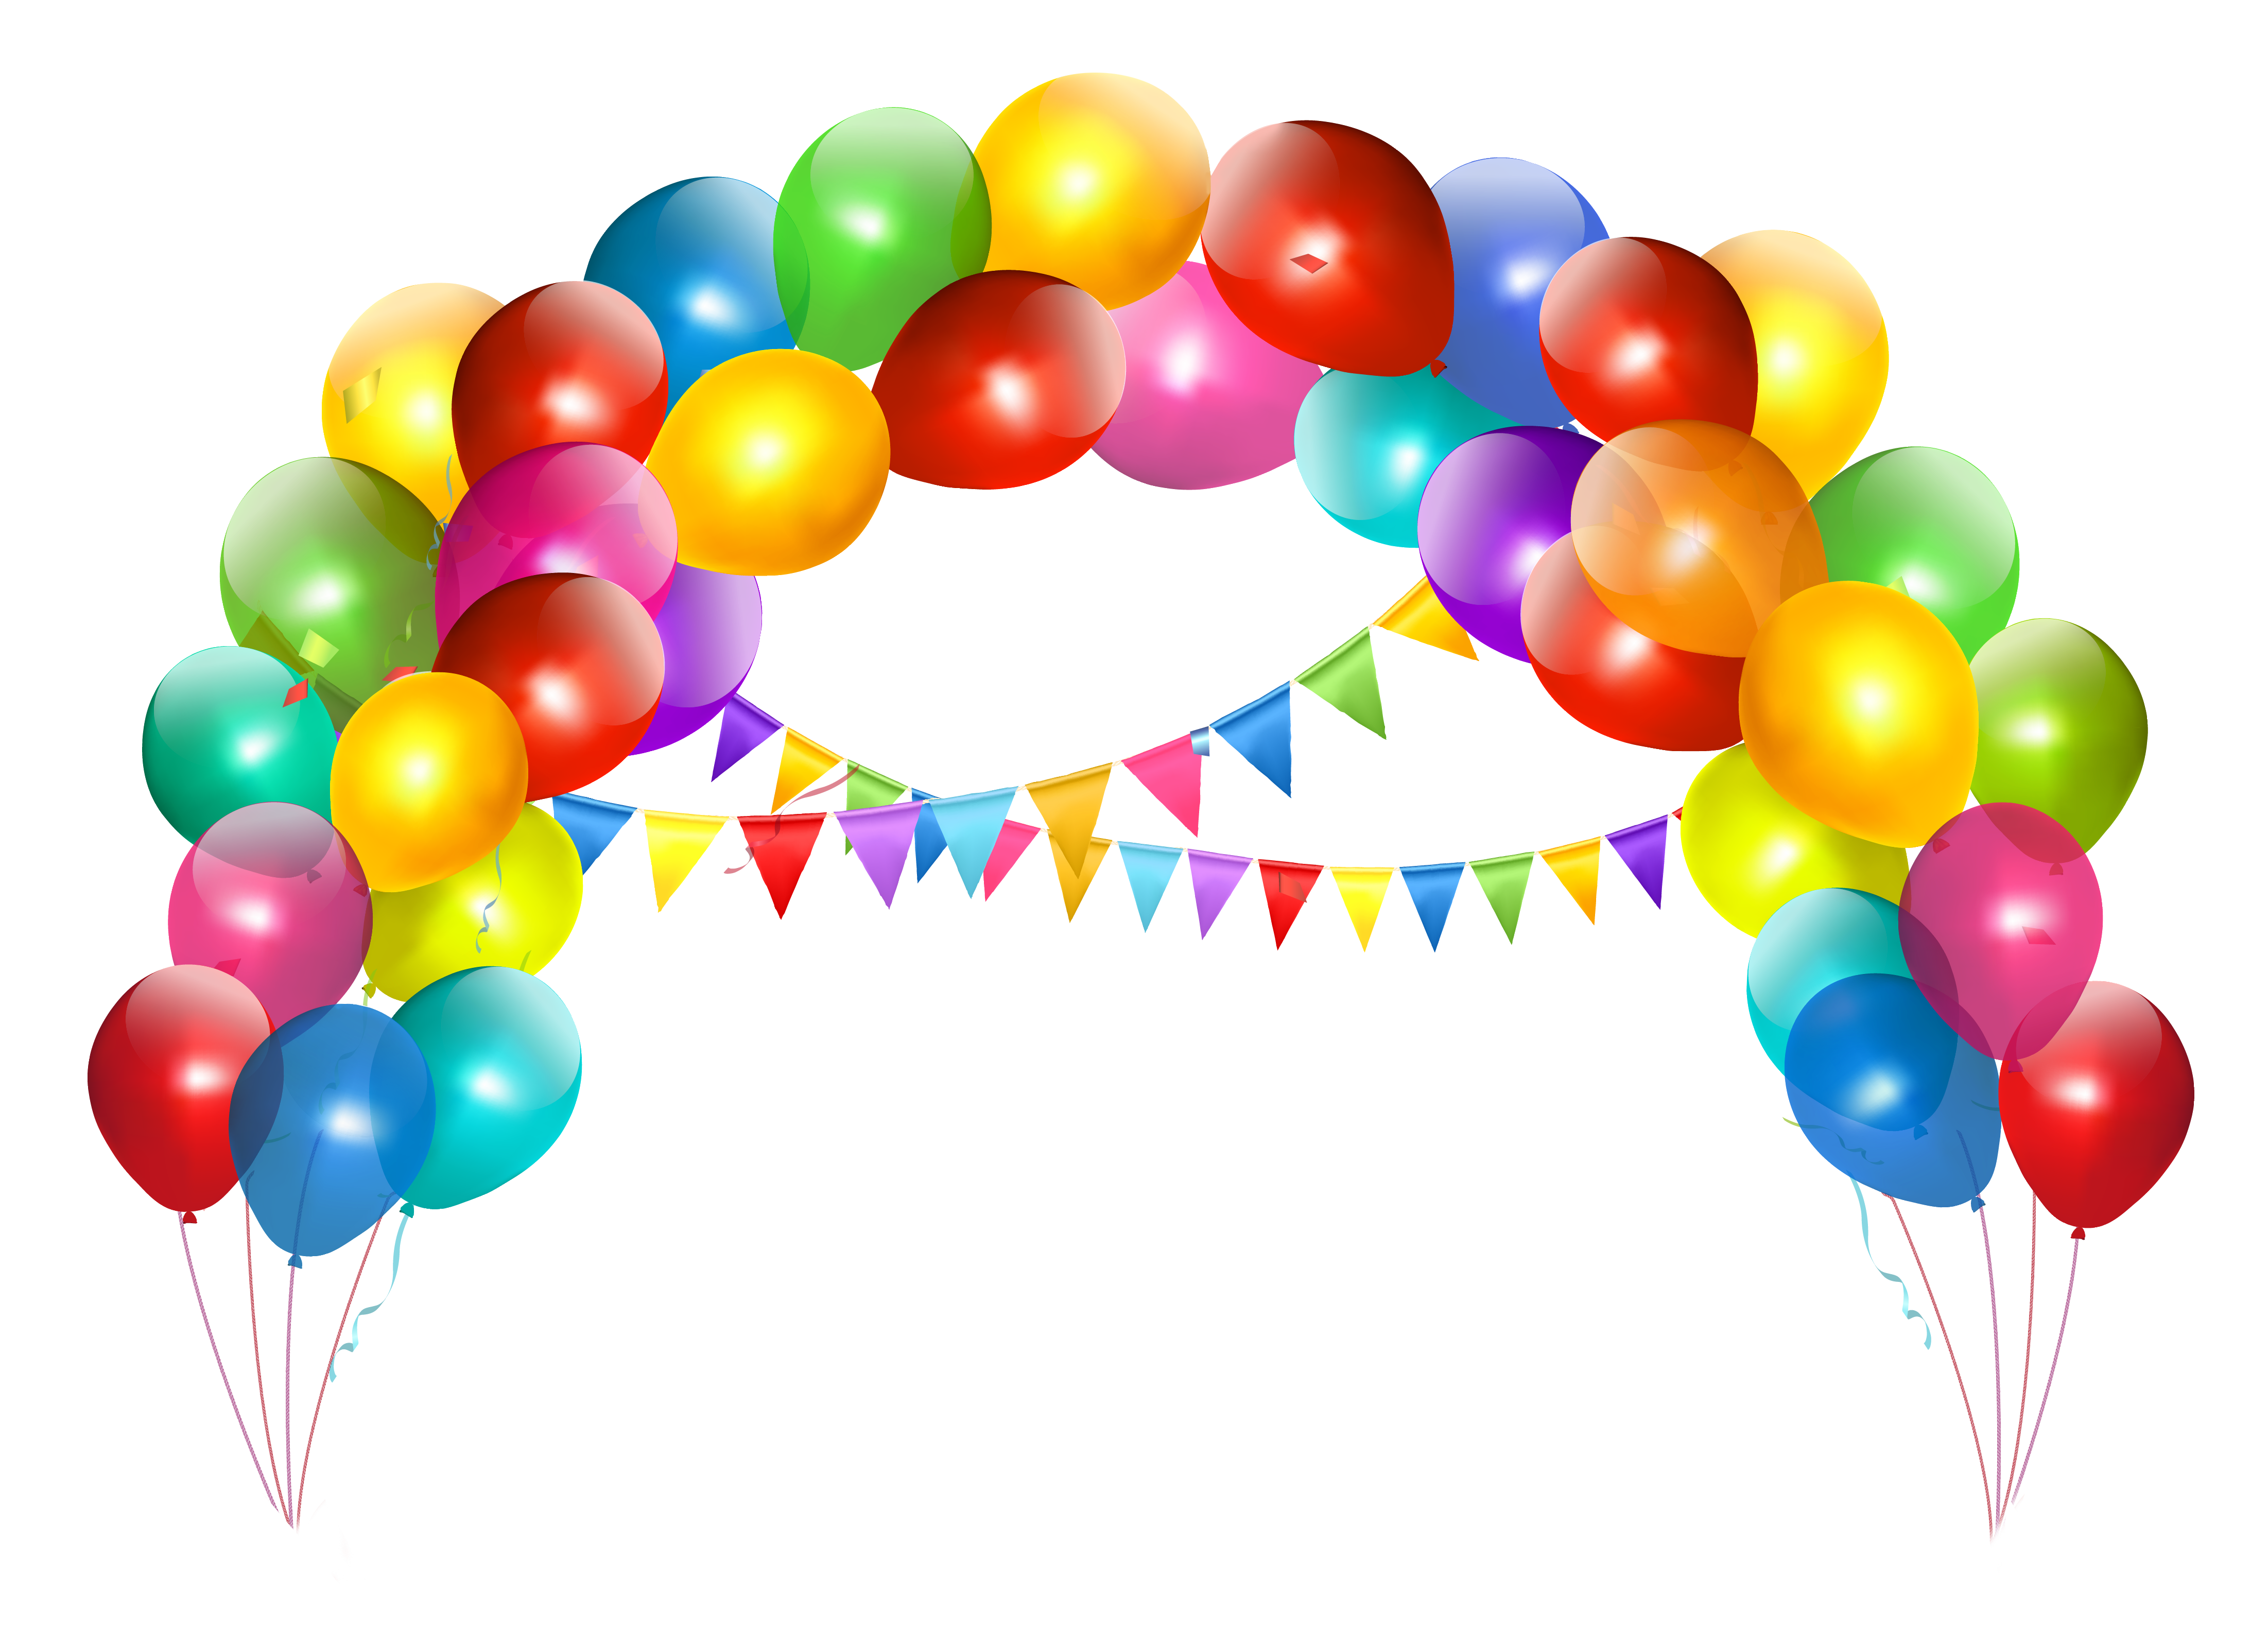 free balloon clip art images - photo #43